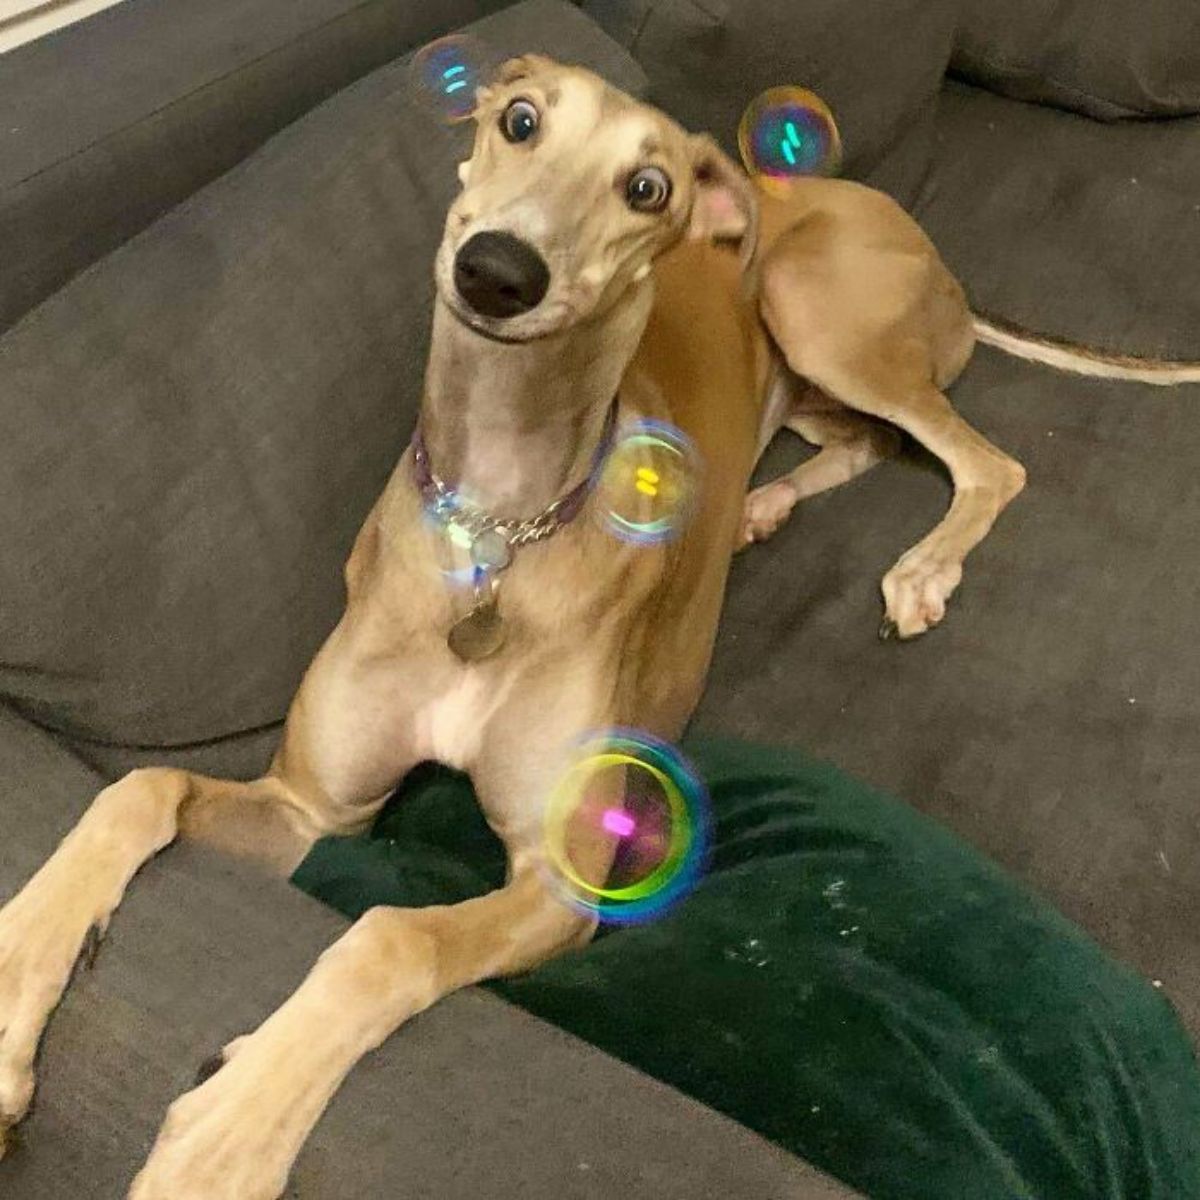 brown greyhound dog laying on a brown sofa surrounded by soap bubbles